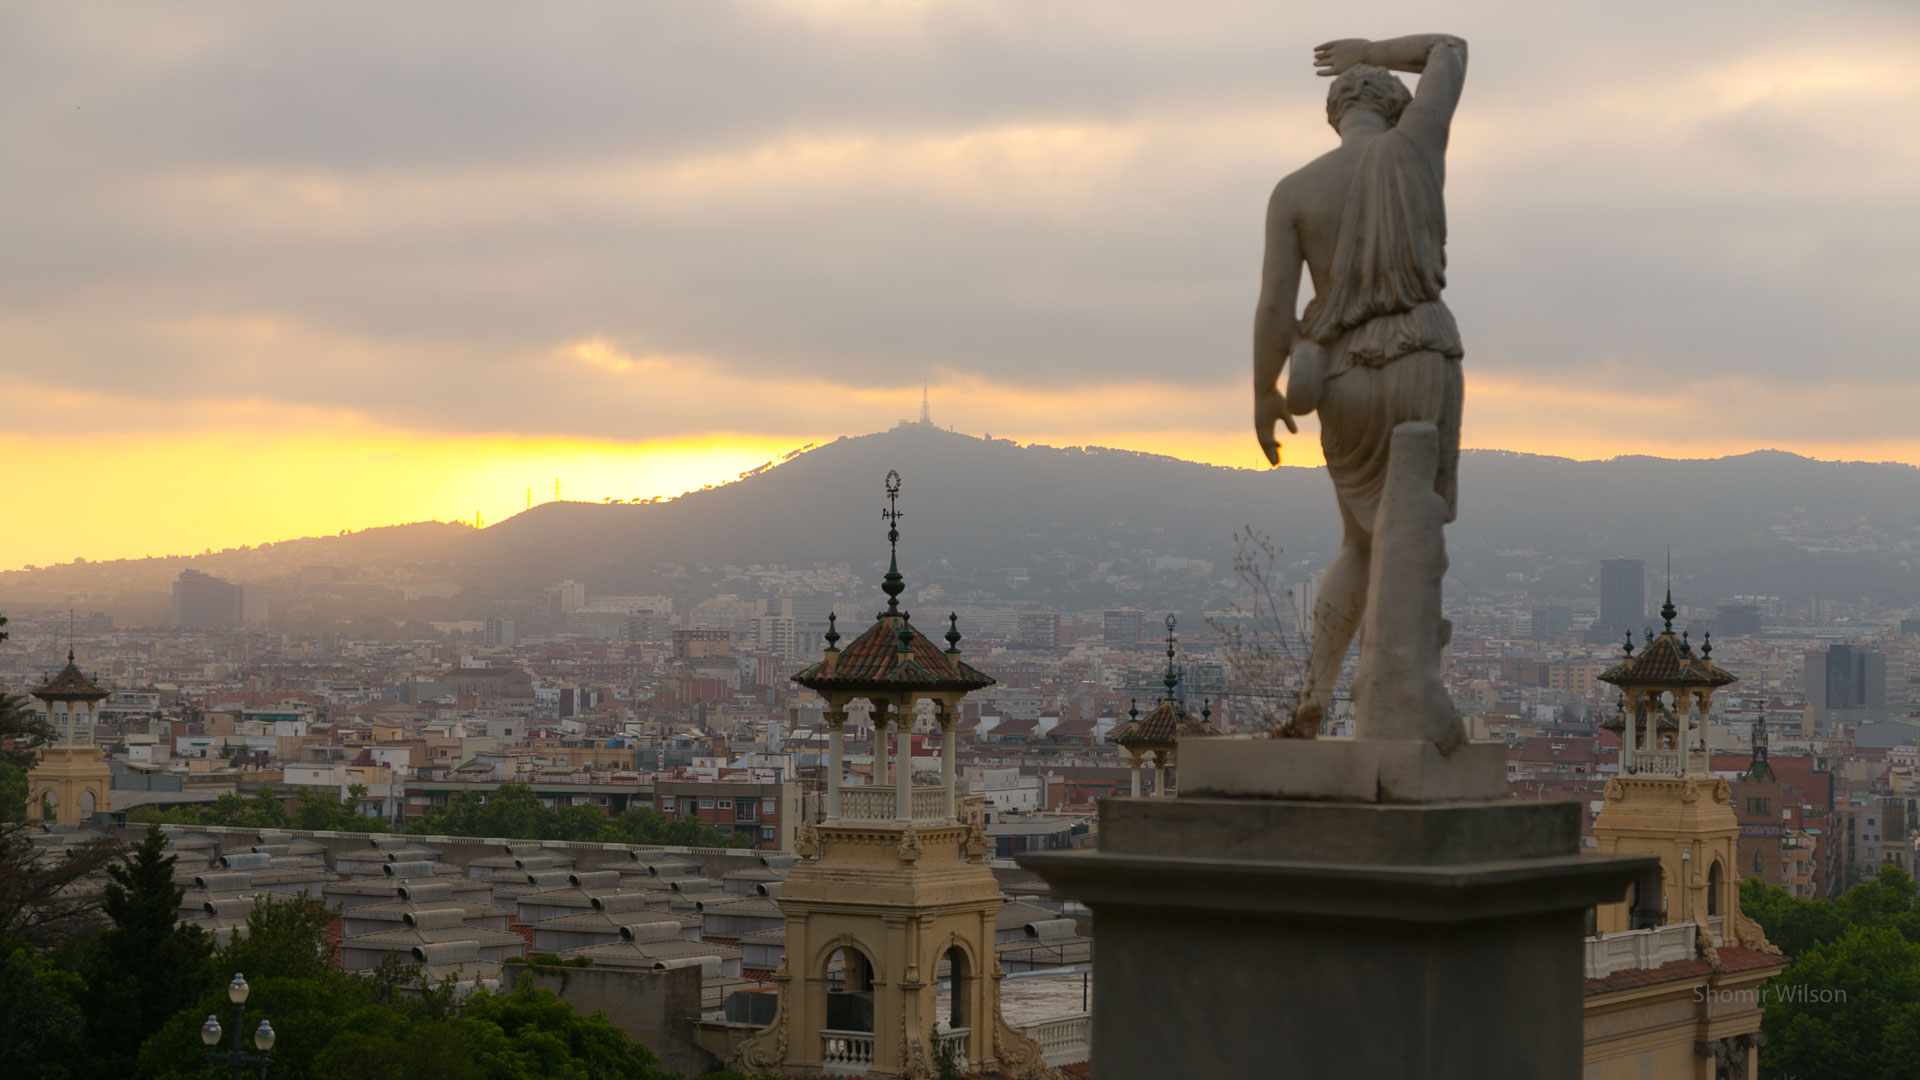 Catalan city skyline from a hillside, with a statue of a person at right, and sunset in the sky